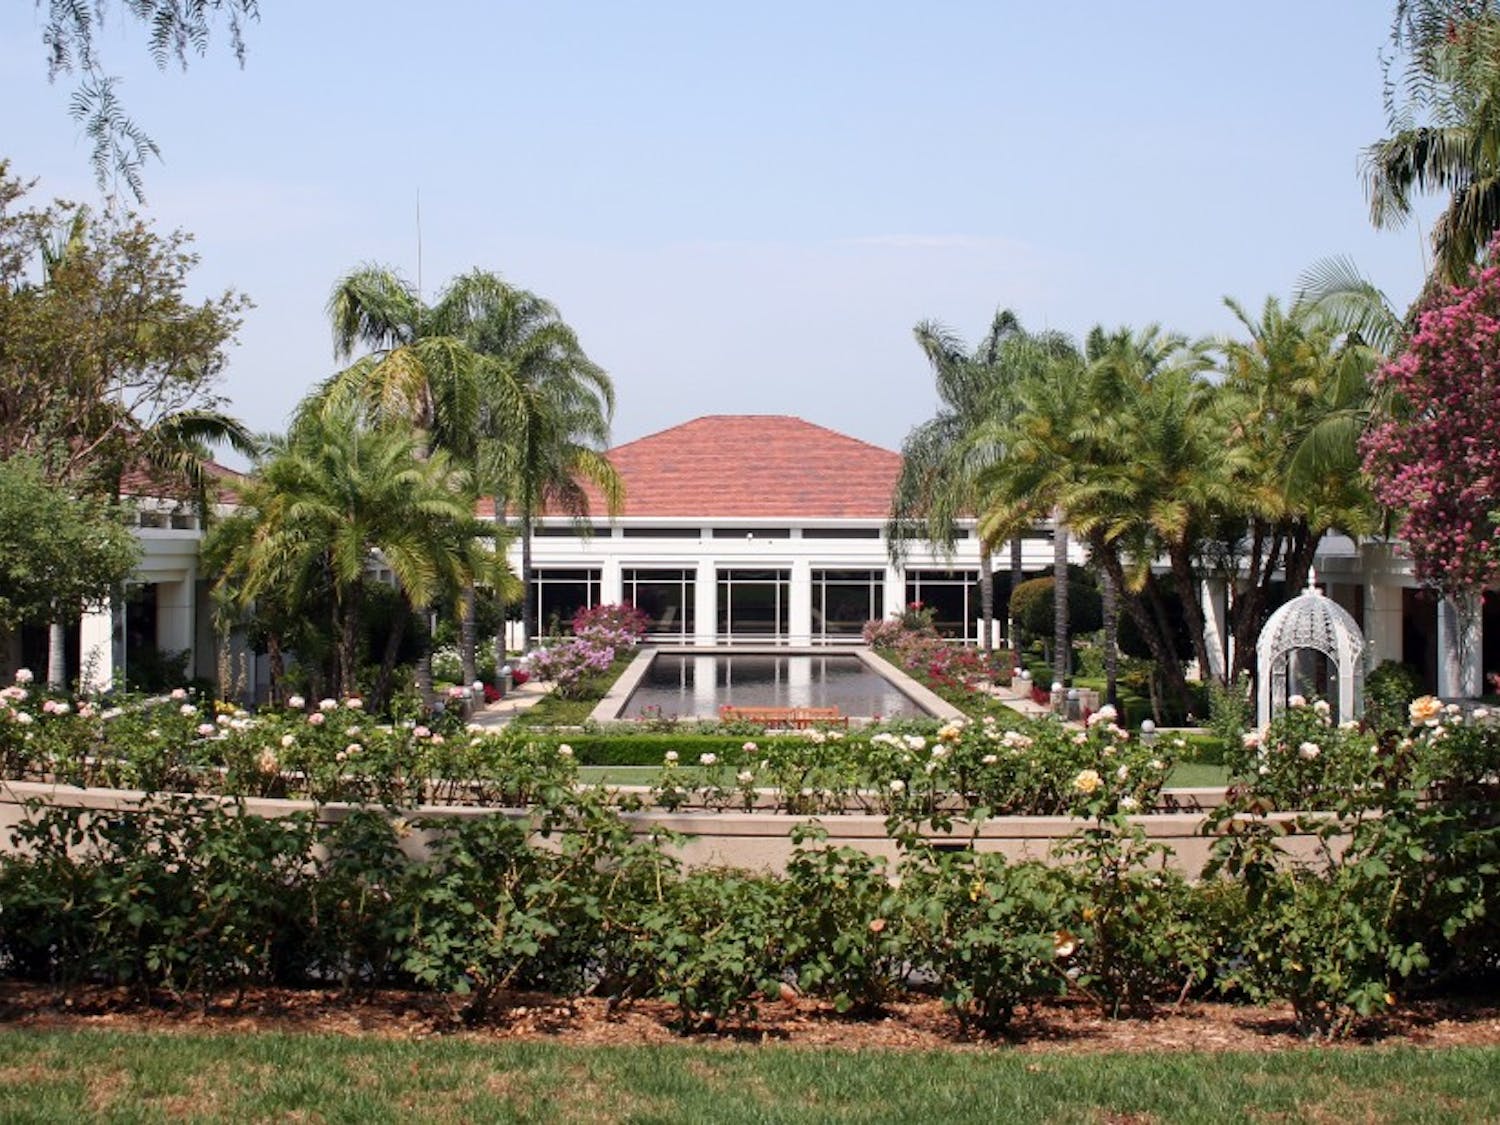 The Richard Nixon Presidential Library and Museum has been open in Yorba Linda, Calif., since 1990.